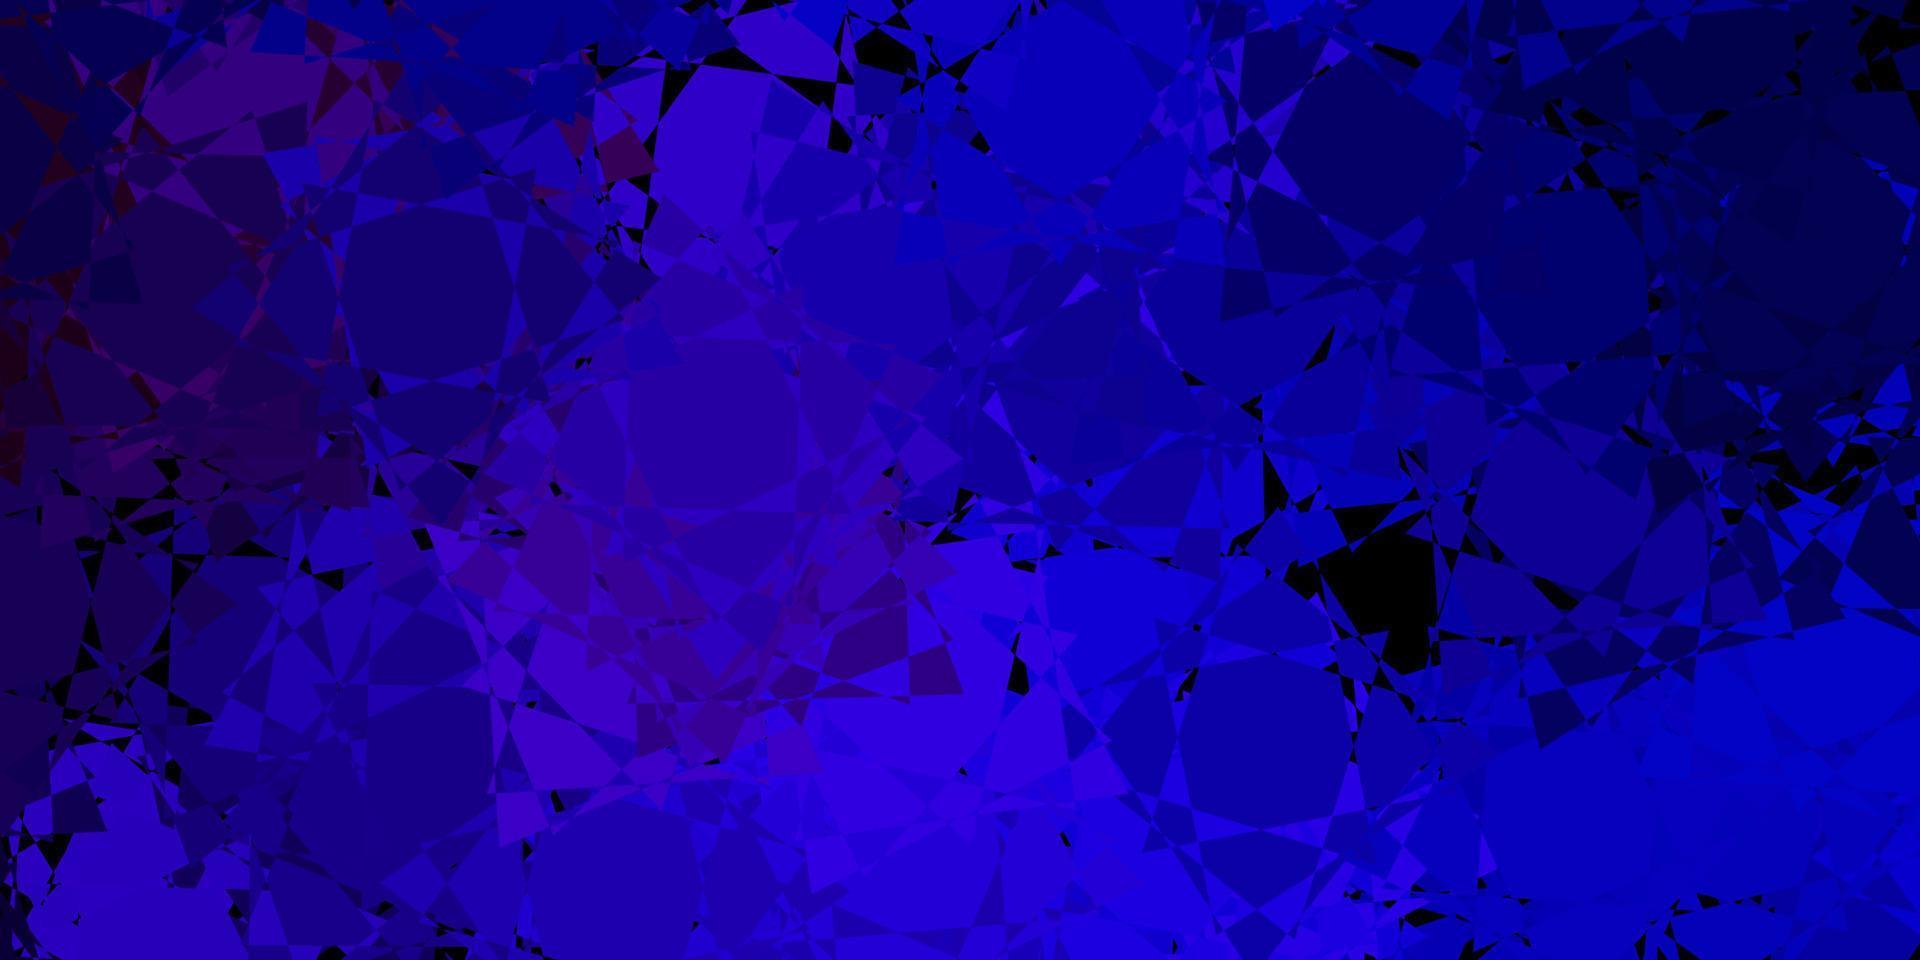 Dark Blue, Red vector pattern with polygonal shapes.